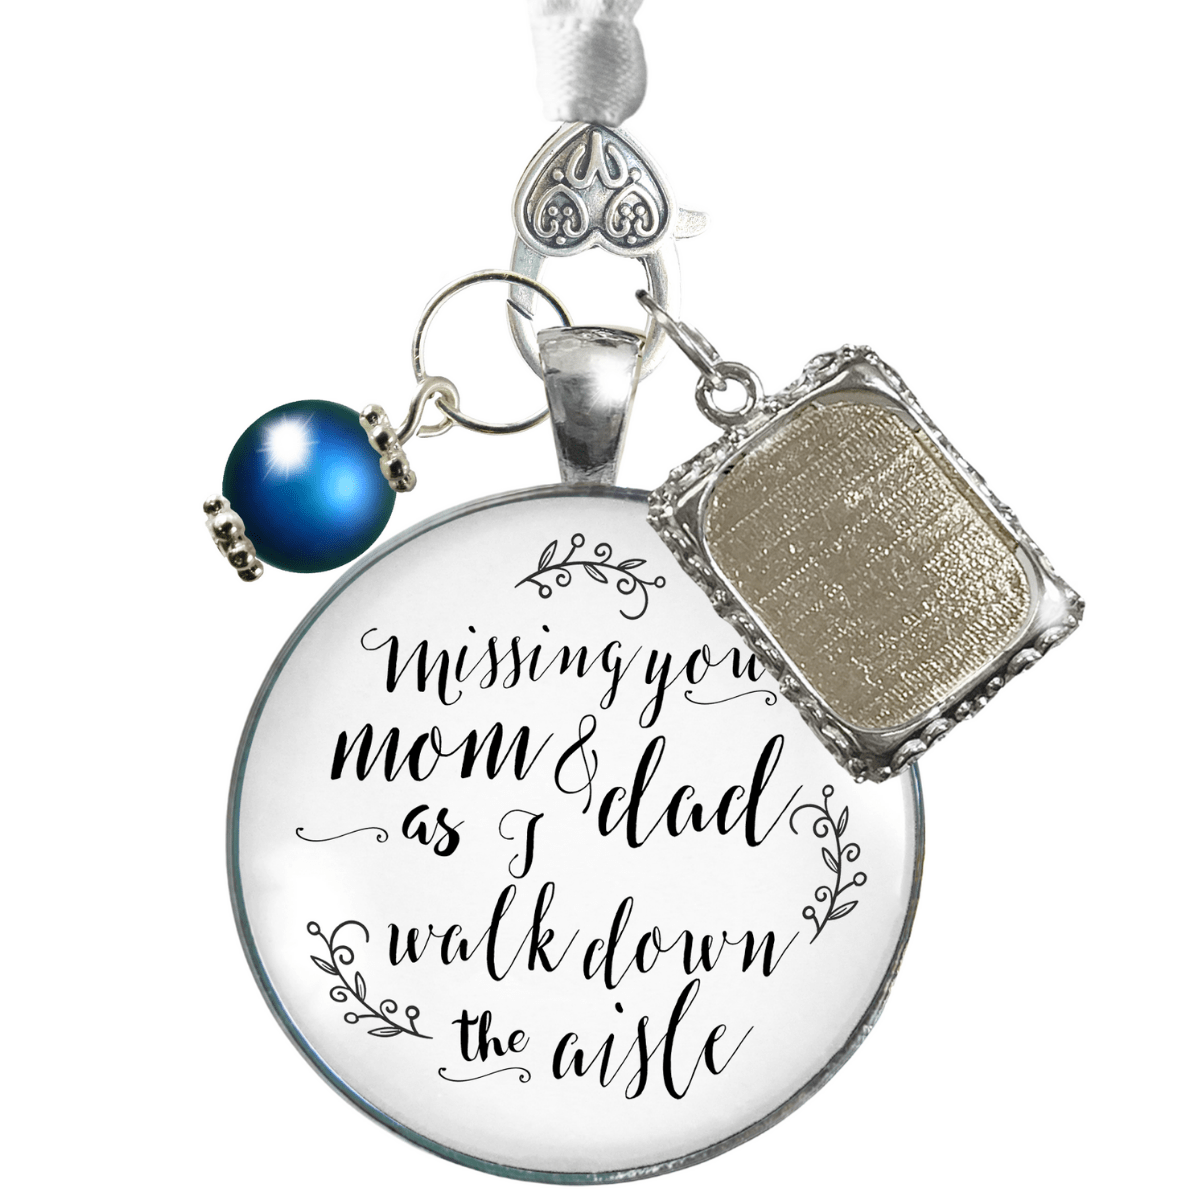 Bouquet Charm Mom Dad Of Bride Remember White Memory Parents Photo Frame Silver Blue Bead - Gutsy Goodness;Bouquet Charm Mom Dad Of Bride Remember White Memory Parents Photo Frame Silver Blue Bead - Gutsy Goodness Handmade Jewelry Gifts